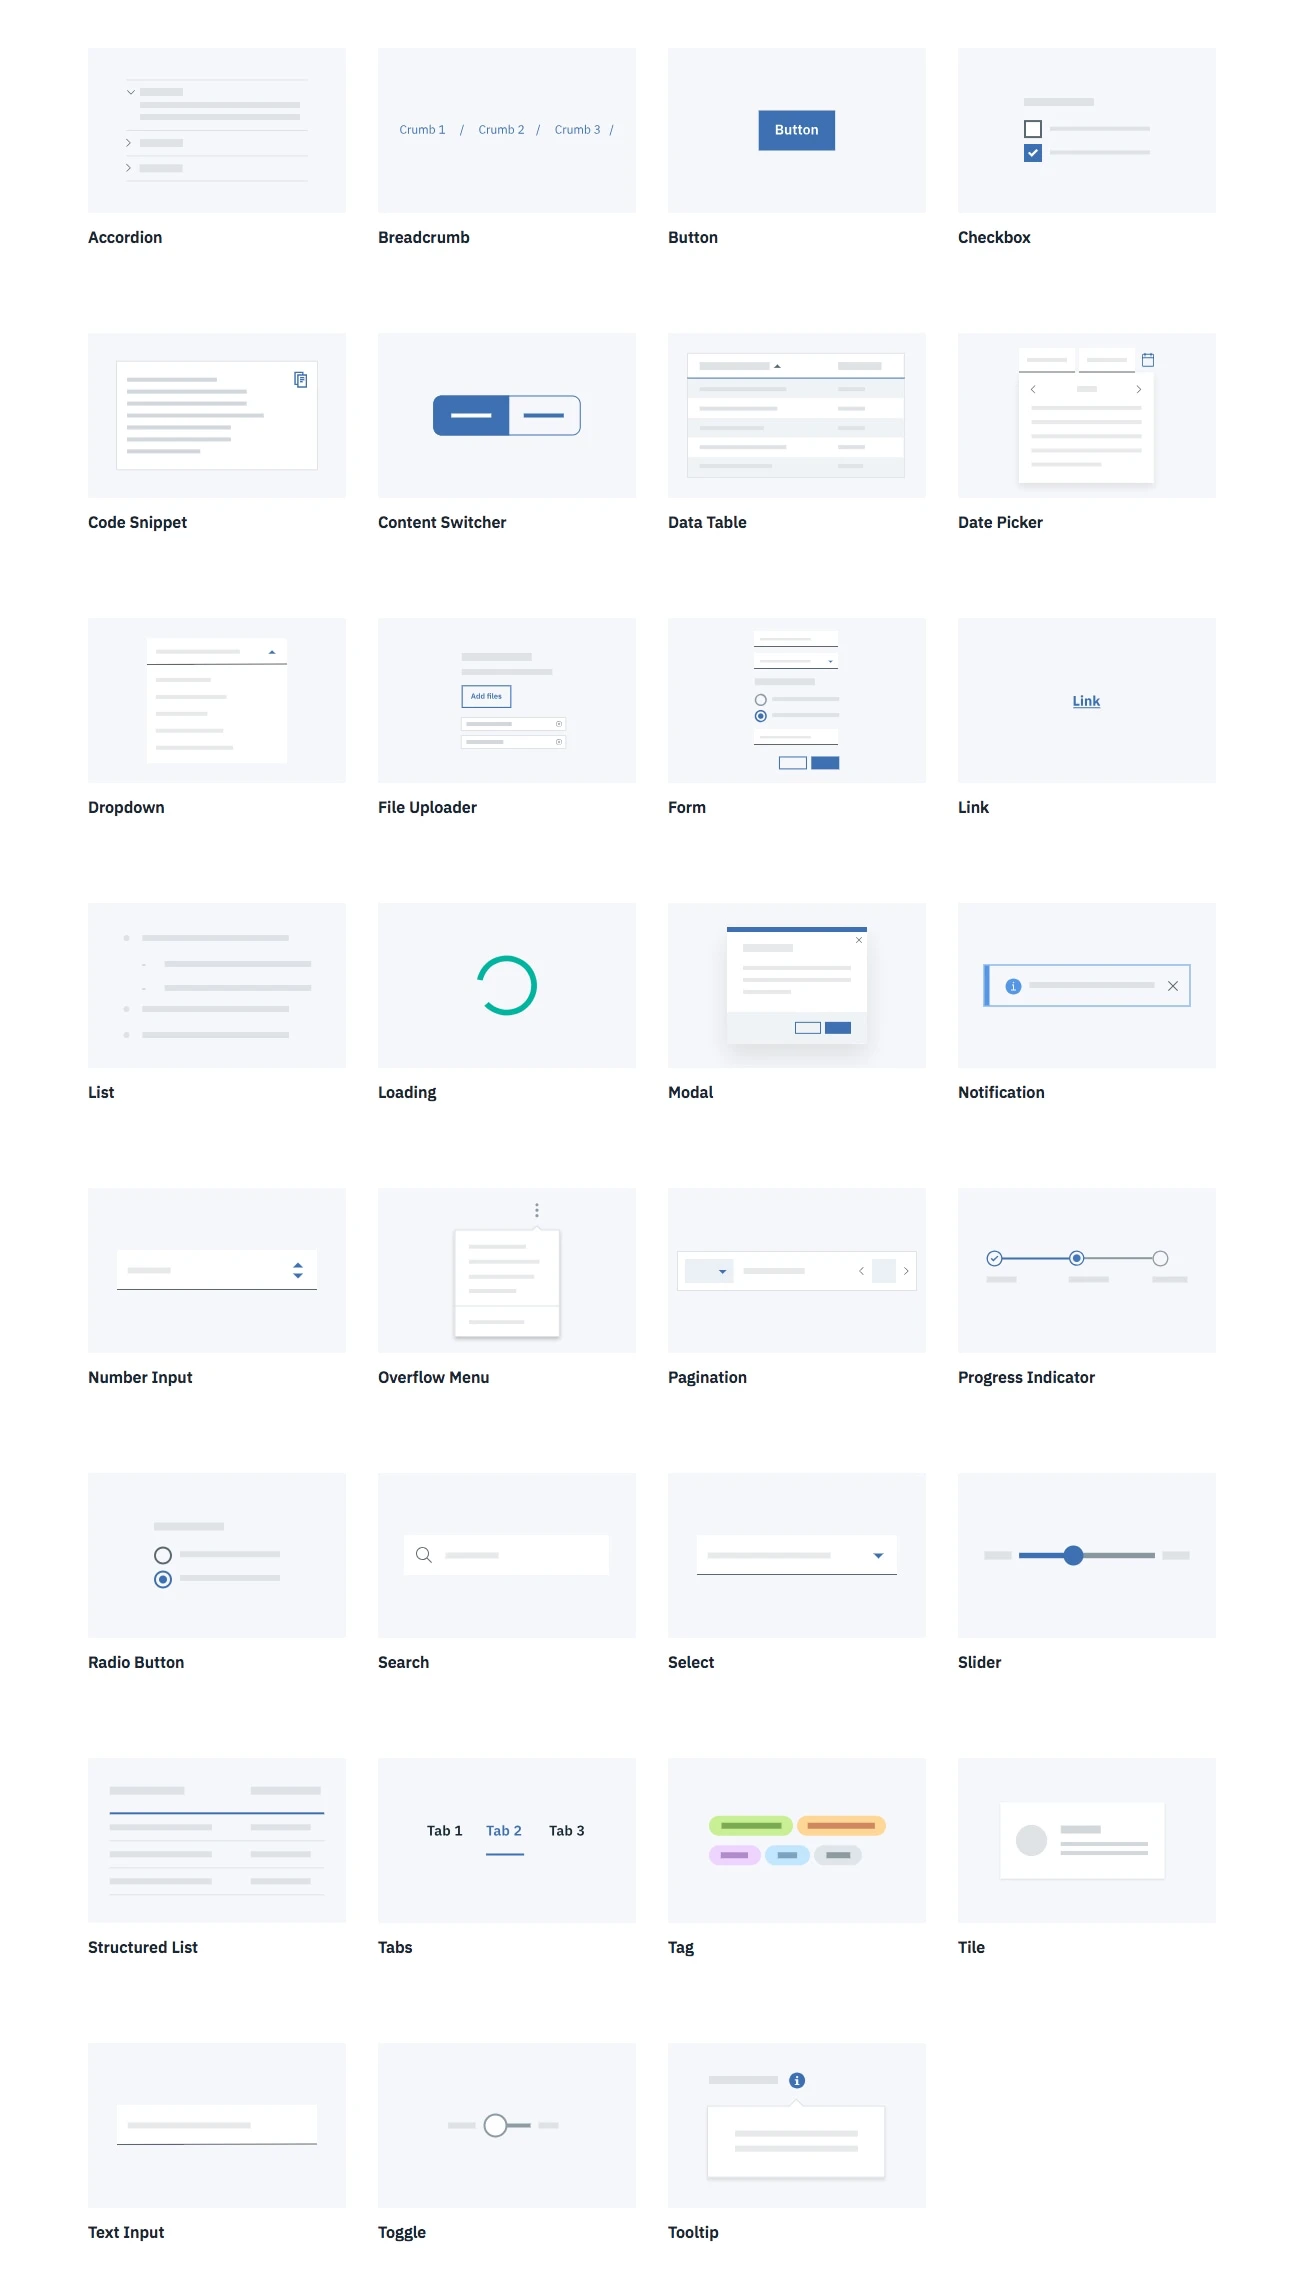 Carbon Design System - Carbon is the design system for IBM Cloud products. It is a series of individual styles, components, and guidelines used for creating unified UI.